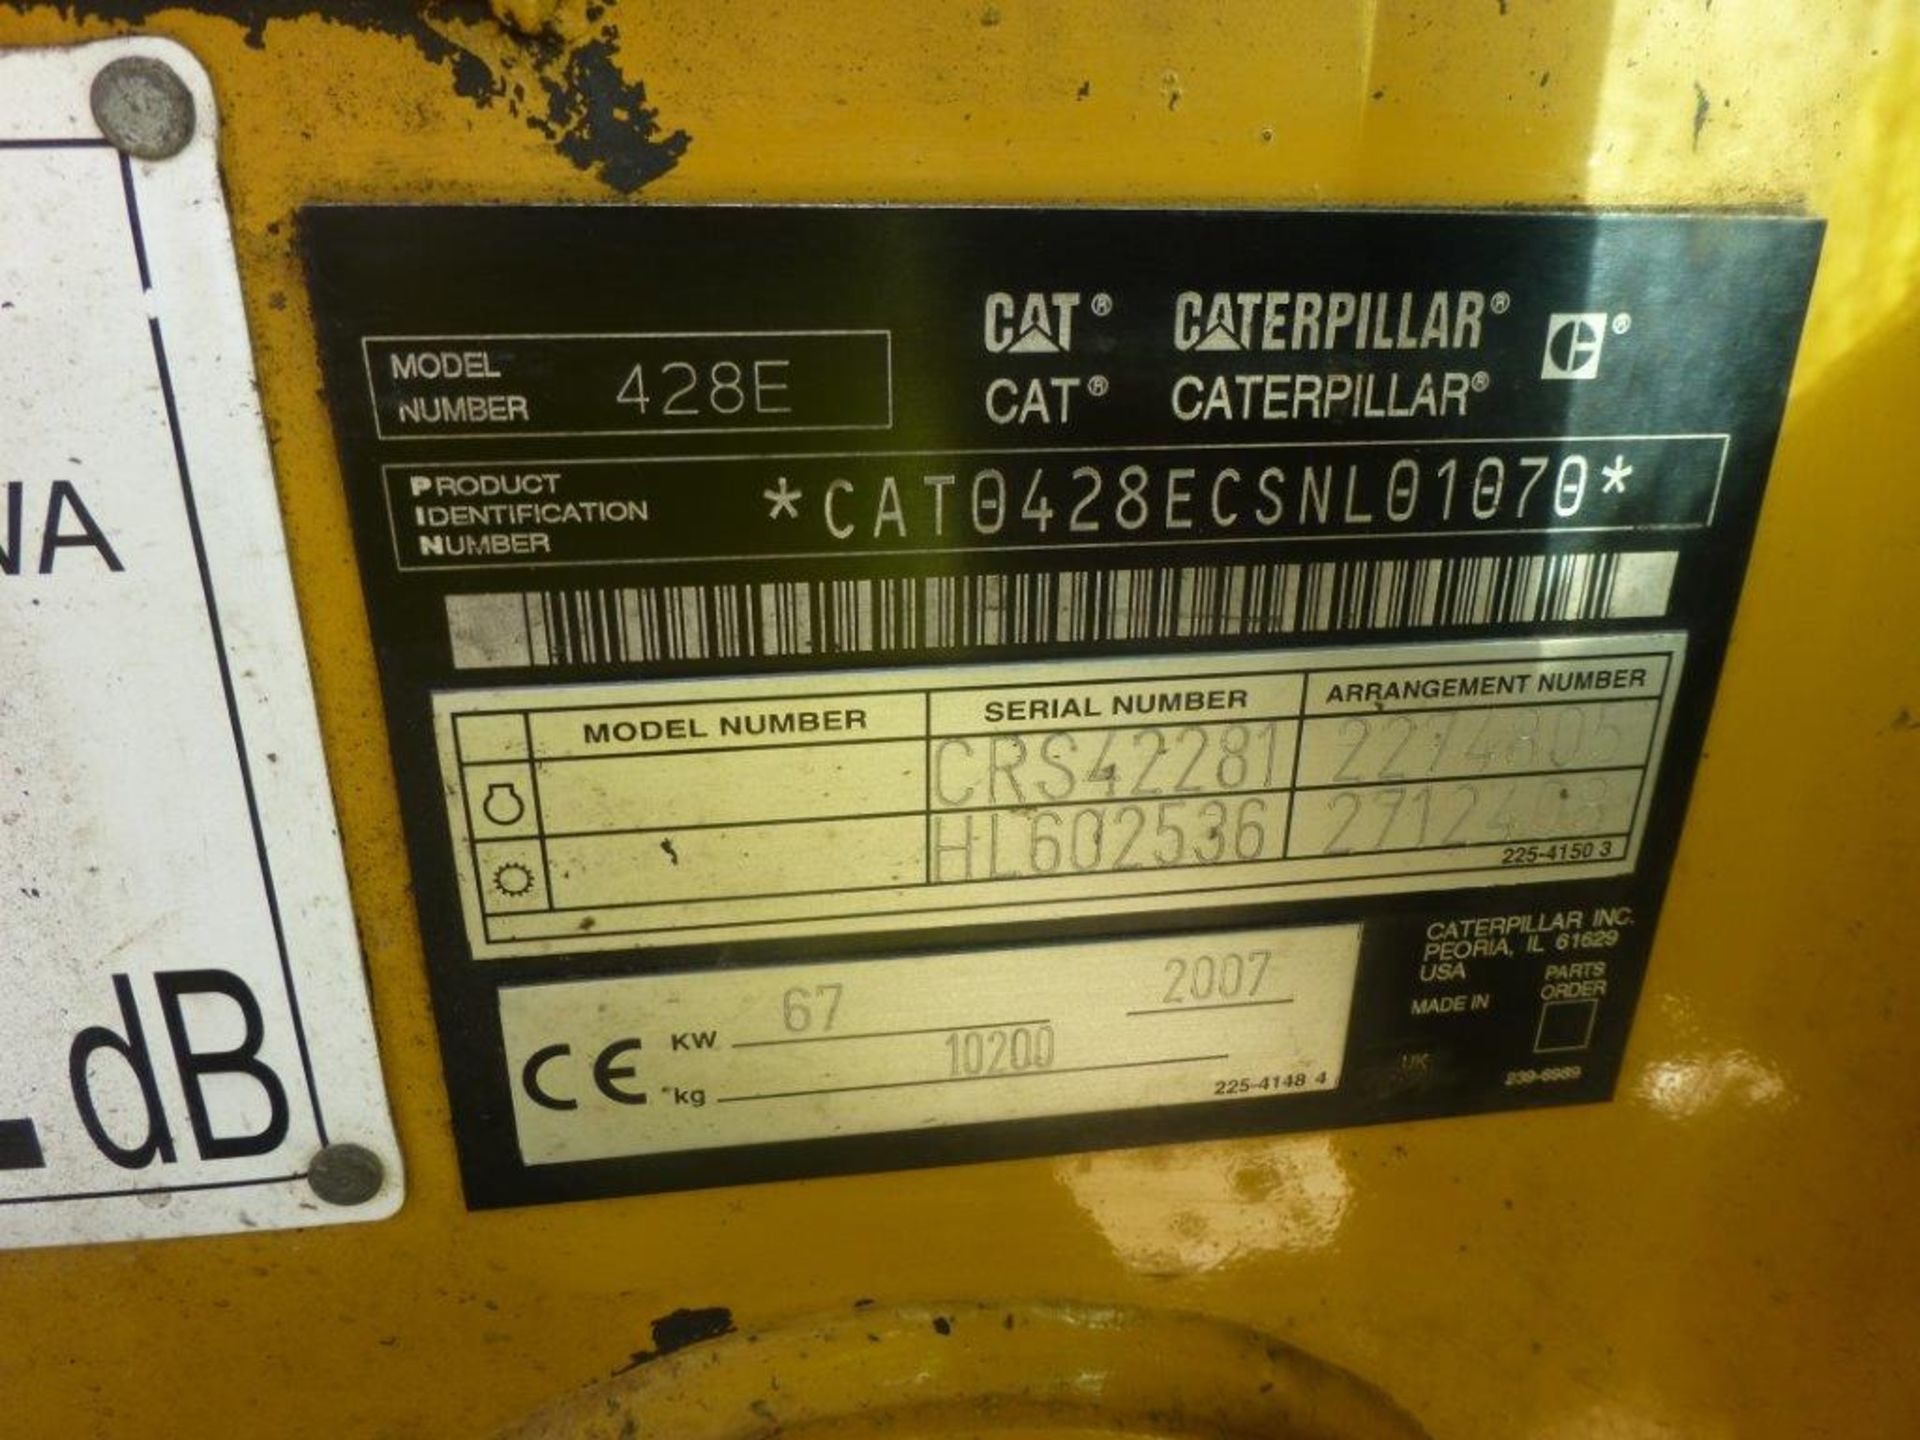 Caterpillar 428E 4x4 backhoe loader (2007), indicated hours 4478.5, PIN no. CAT0428ECSNL01070, - Image 5 of 7